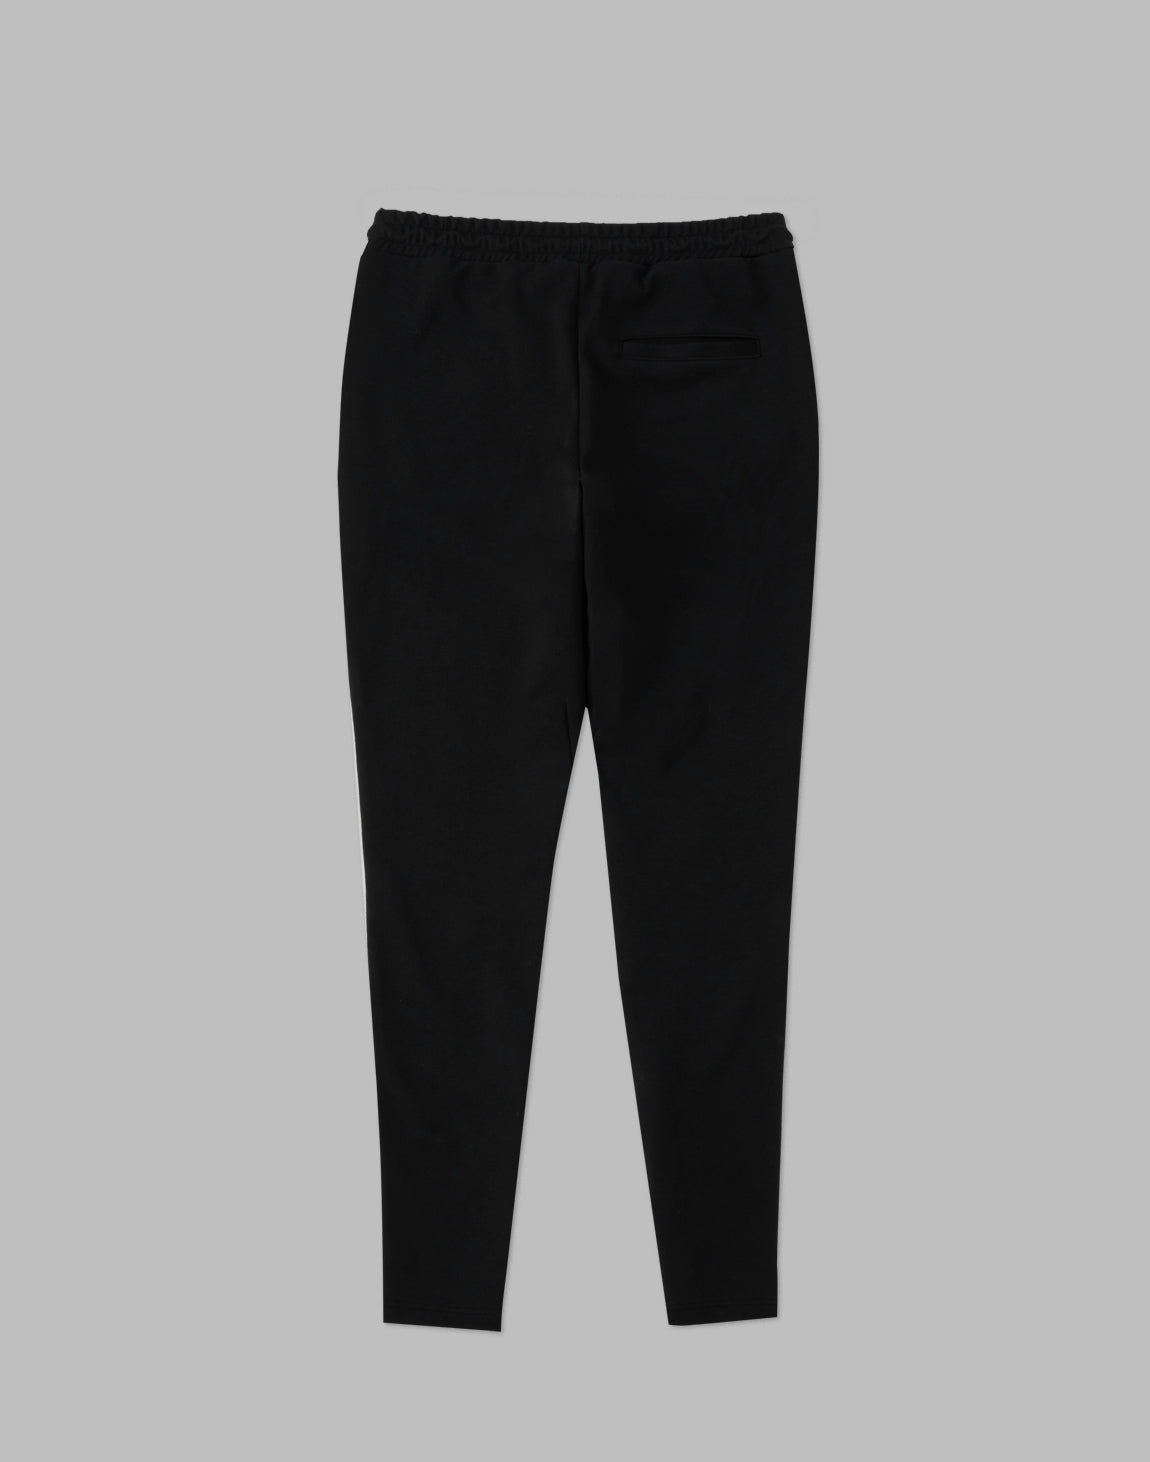 CRONOS MODE STRETCH PANTS – クロノス CRONOS Official 